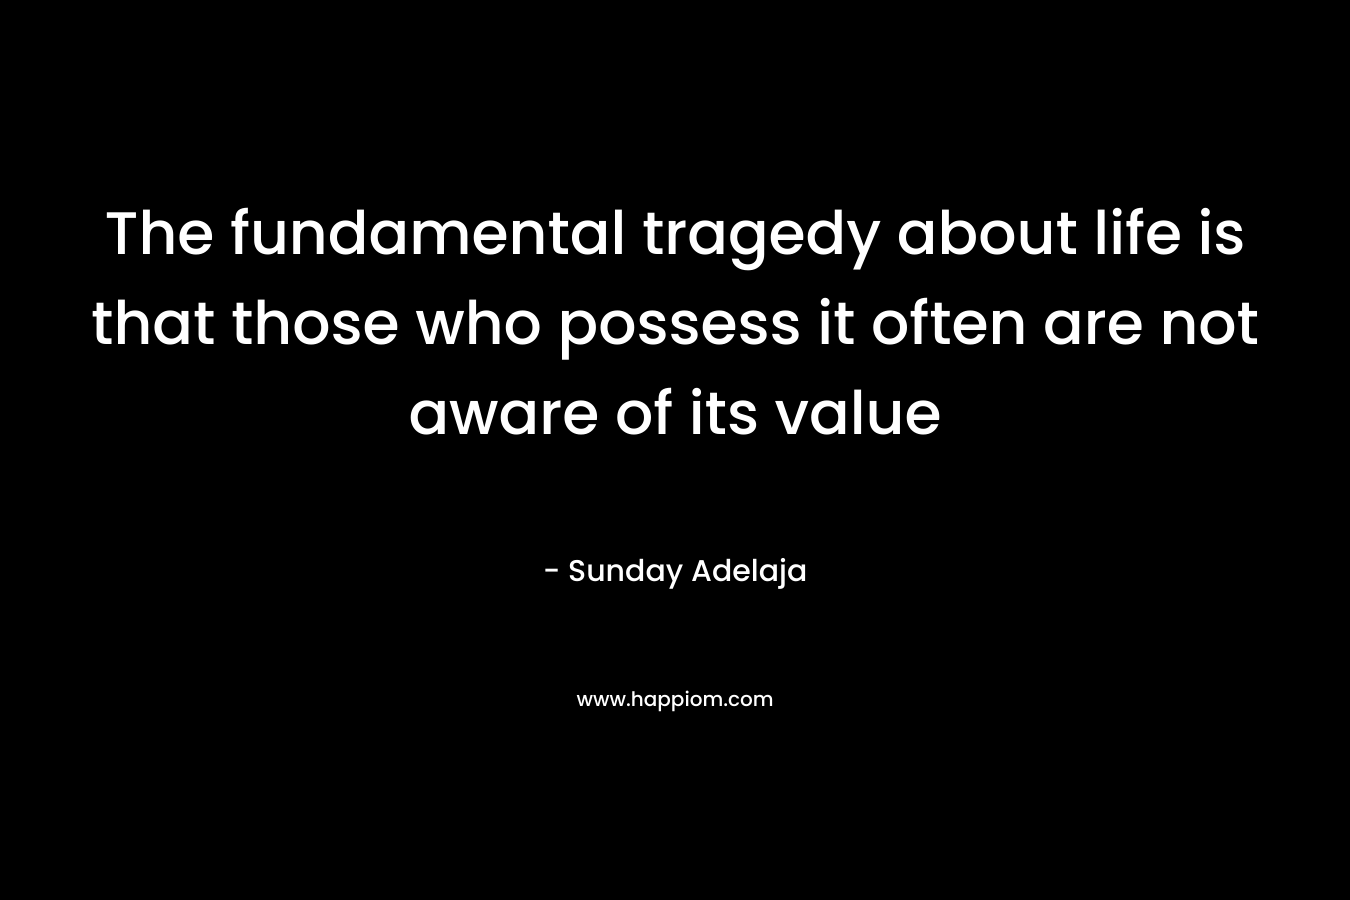 The fundamental tragedy about life is that those who possess it often are not aware of its value